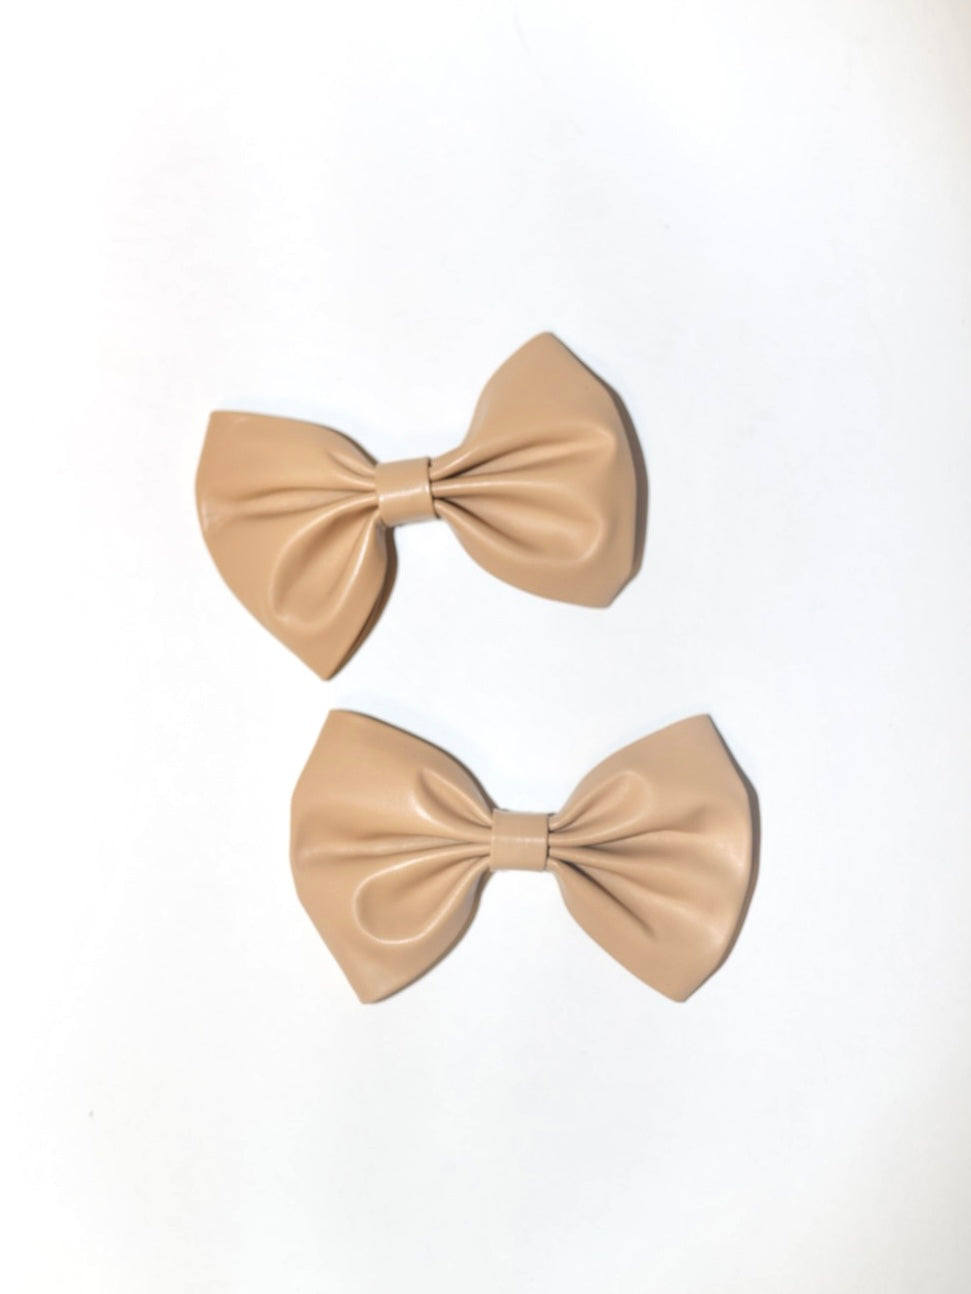 CLIP ON BOWS - THE JENNIE BEIGE